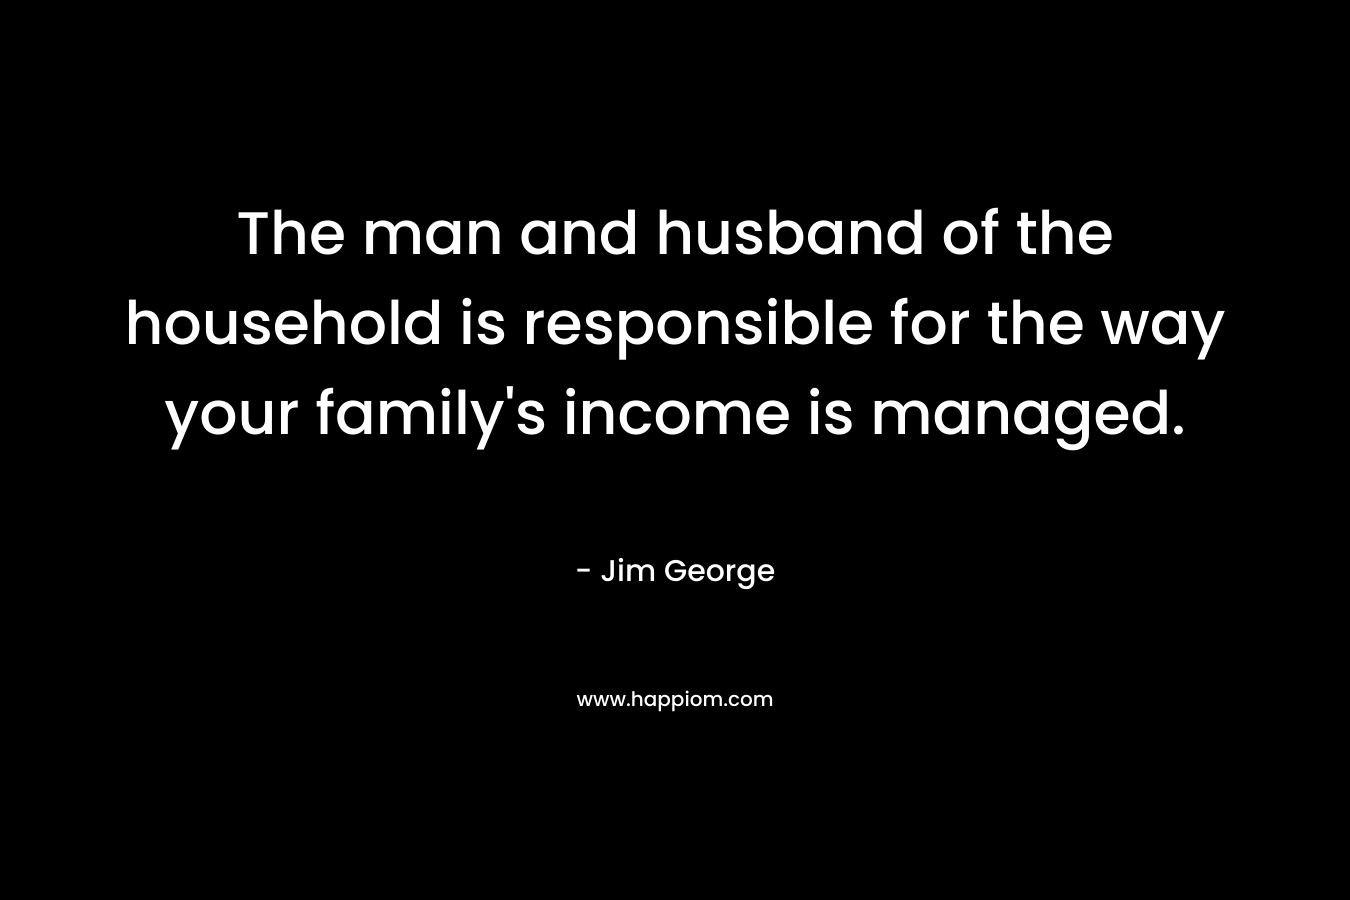 The man and husband of the household is responsible for the way your family's income is managed.